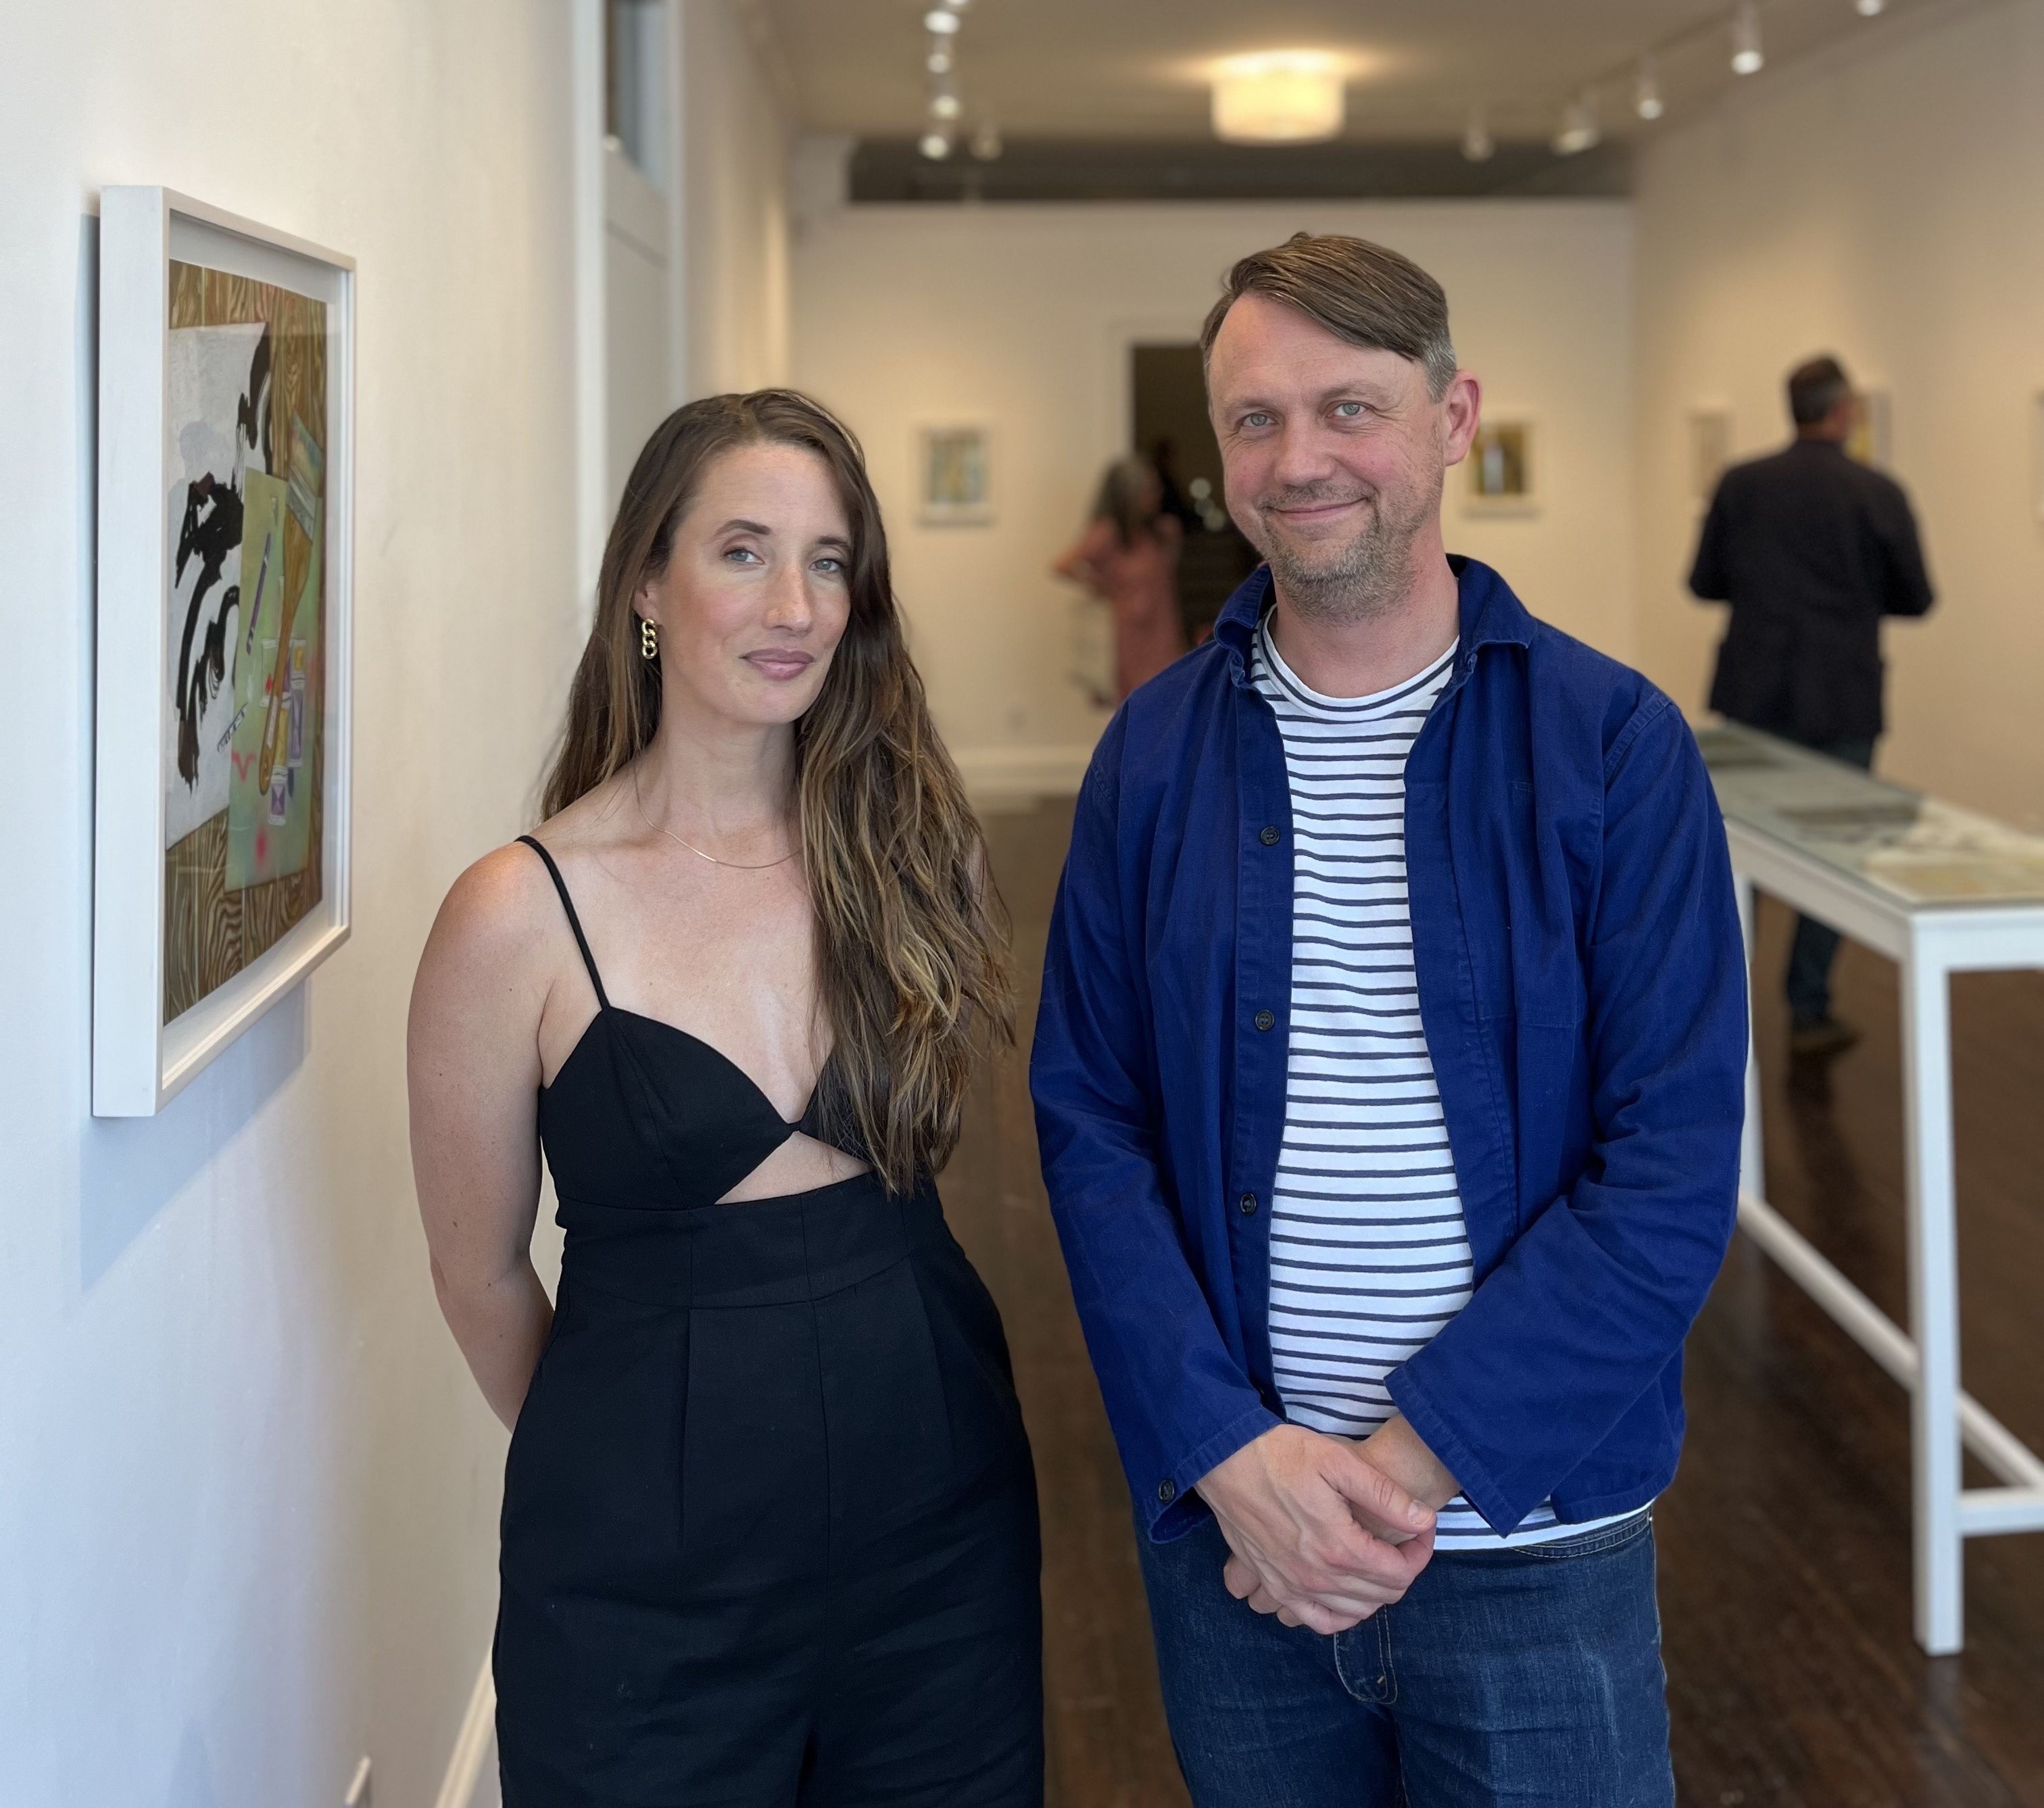 Between myth and reality: Catherine Haggarty and Dan Gunn at Geary